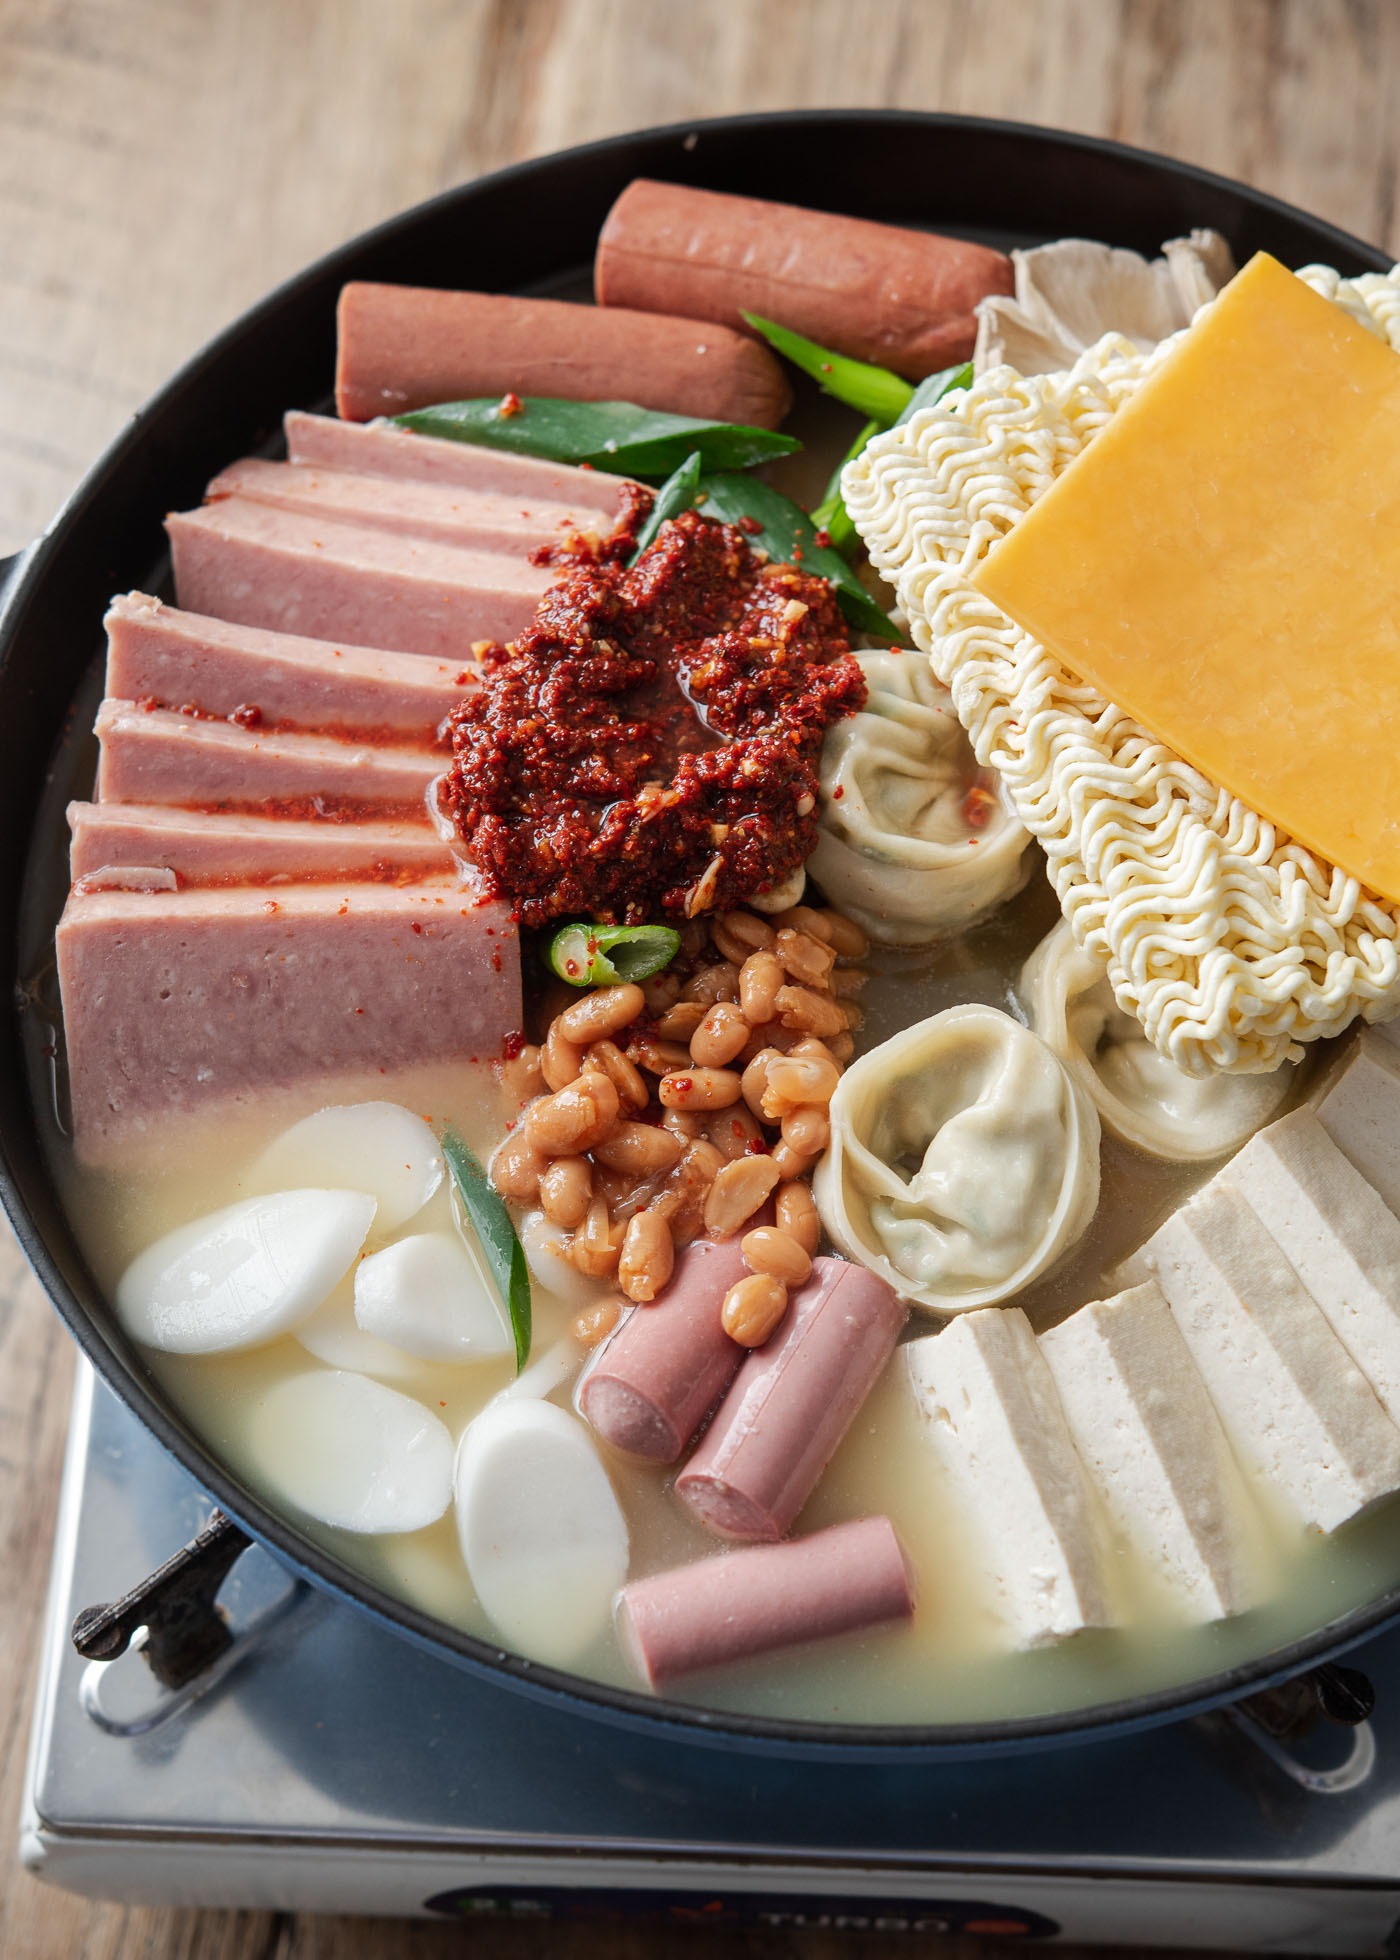 Korean army stew (budae jjigae) pot filled with canned meats, rice cakes, ramen noodles and cheese.